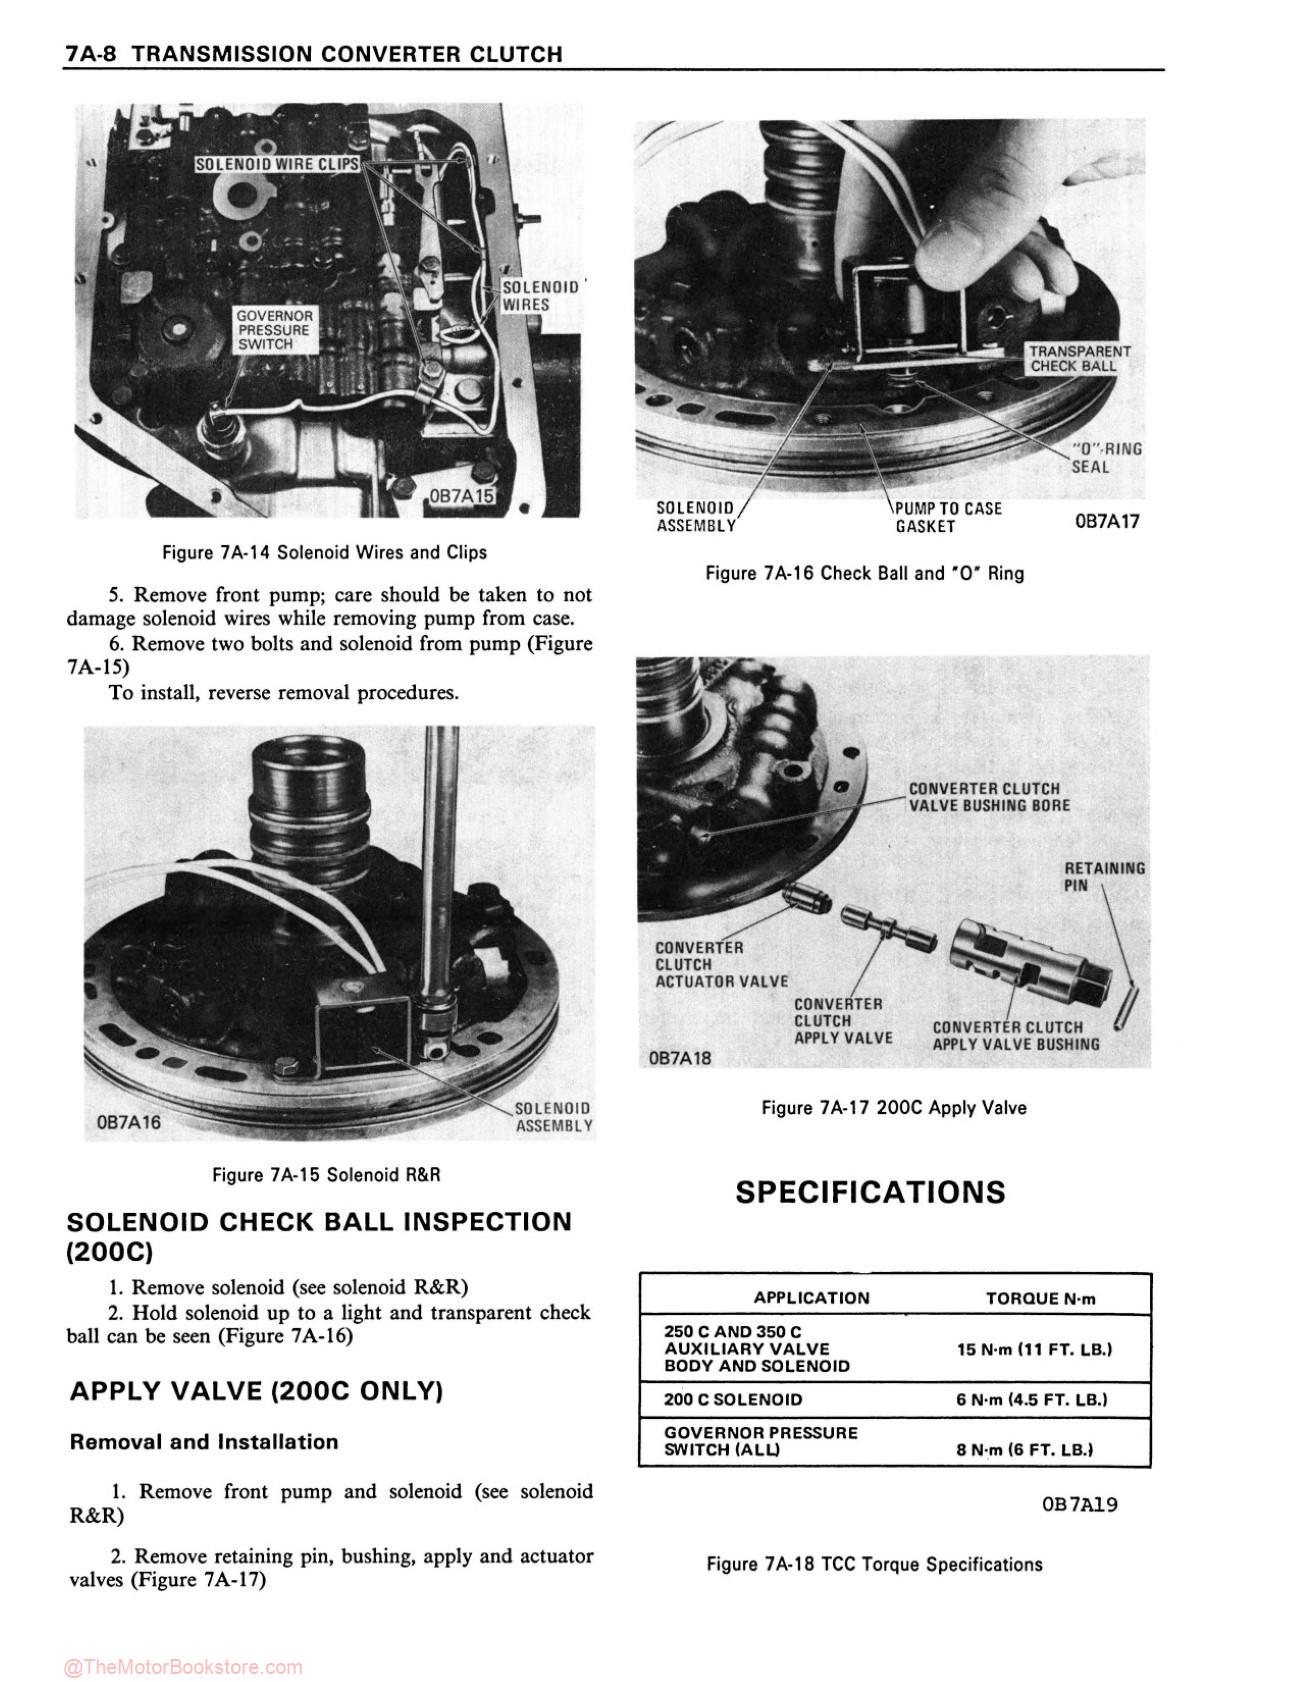 1980 Buick Chassis Service Manual - Sample Page 2